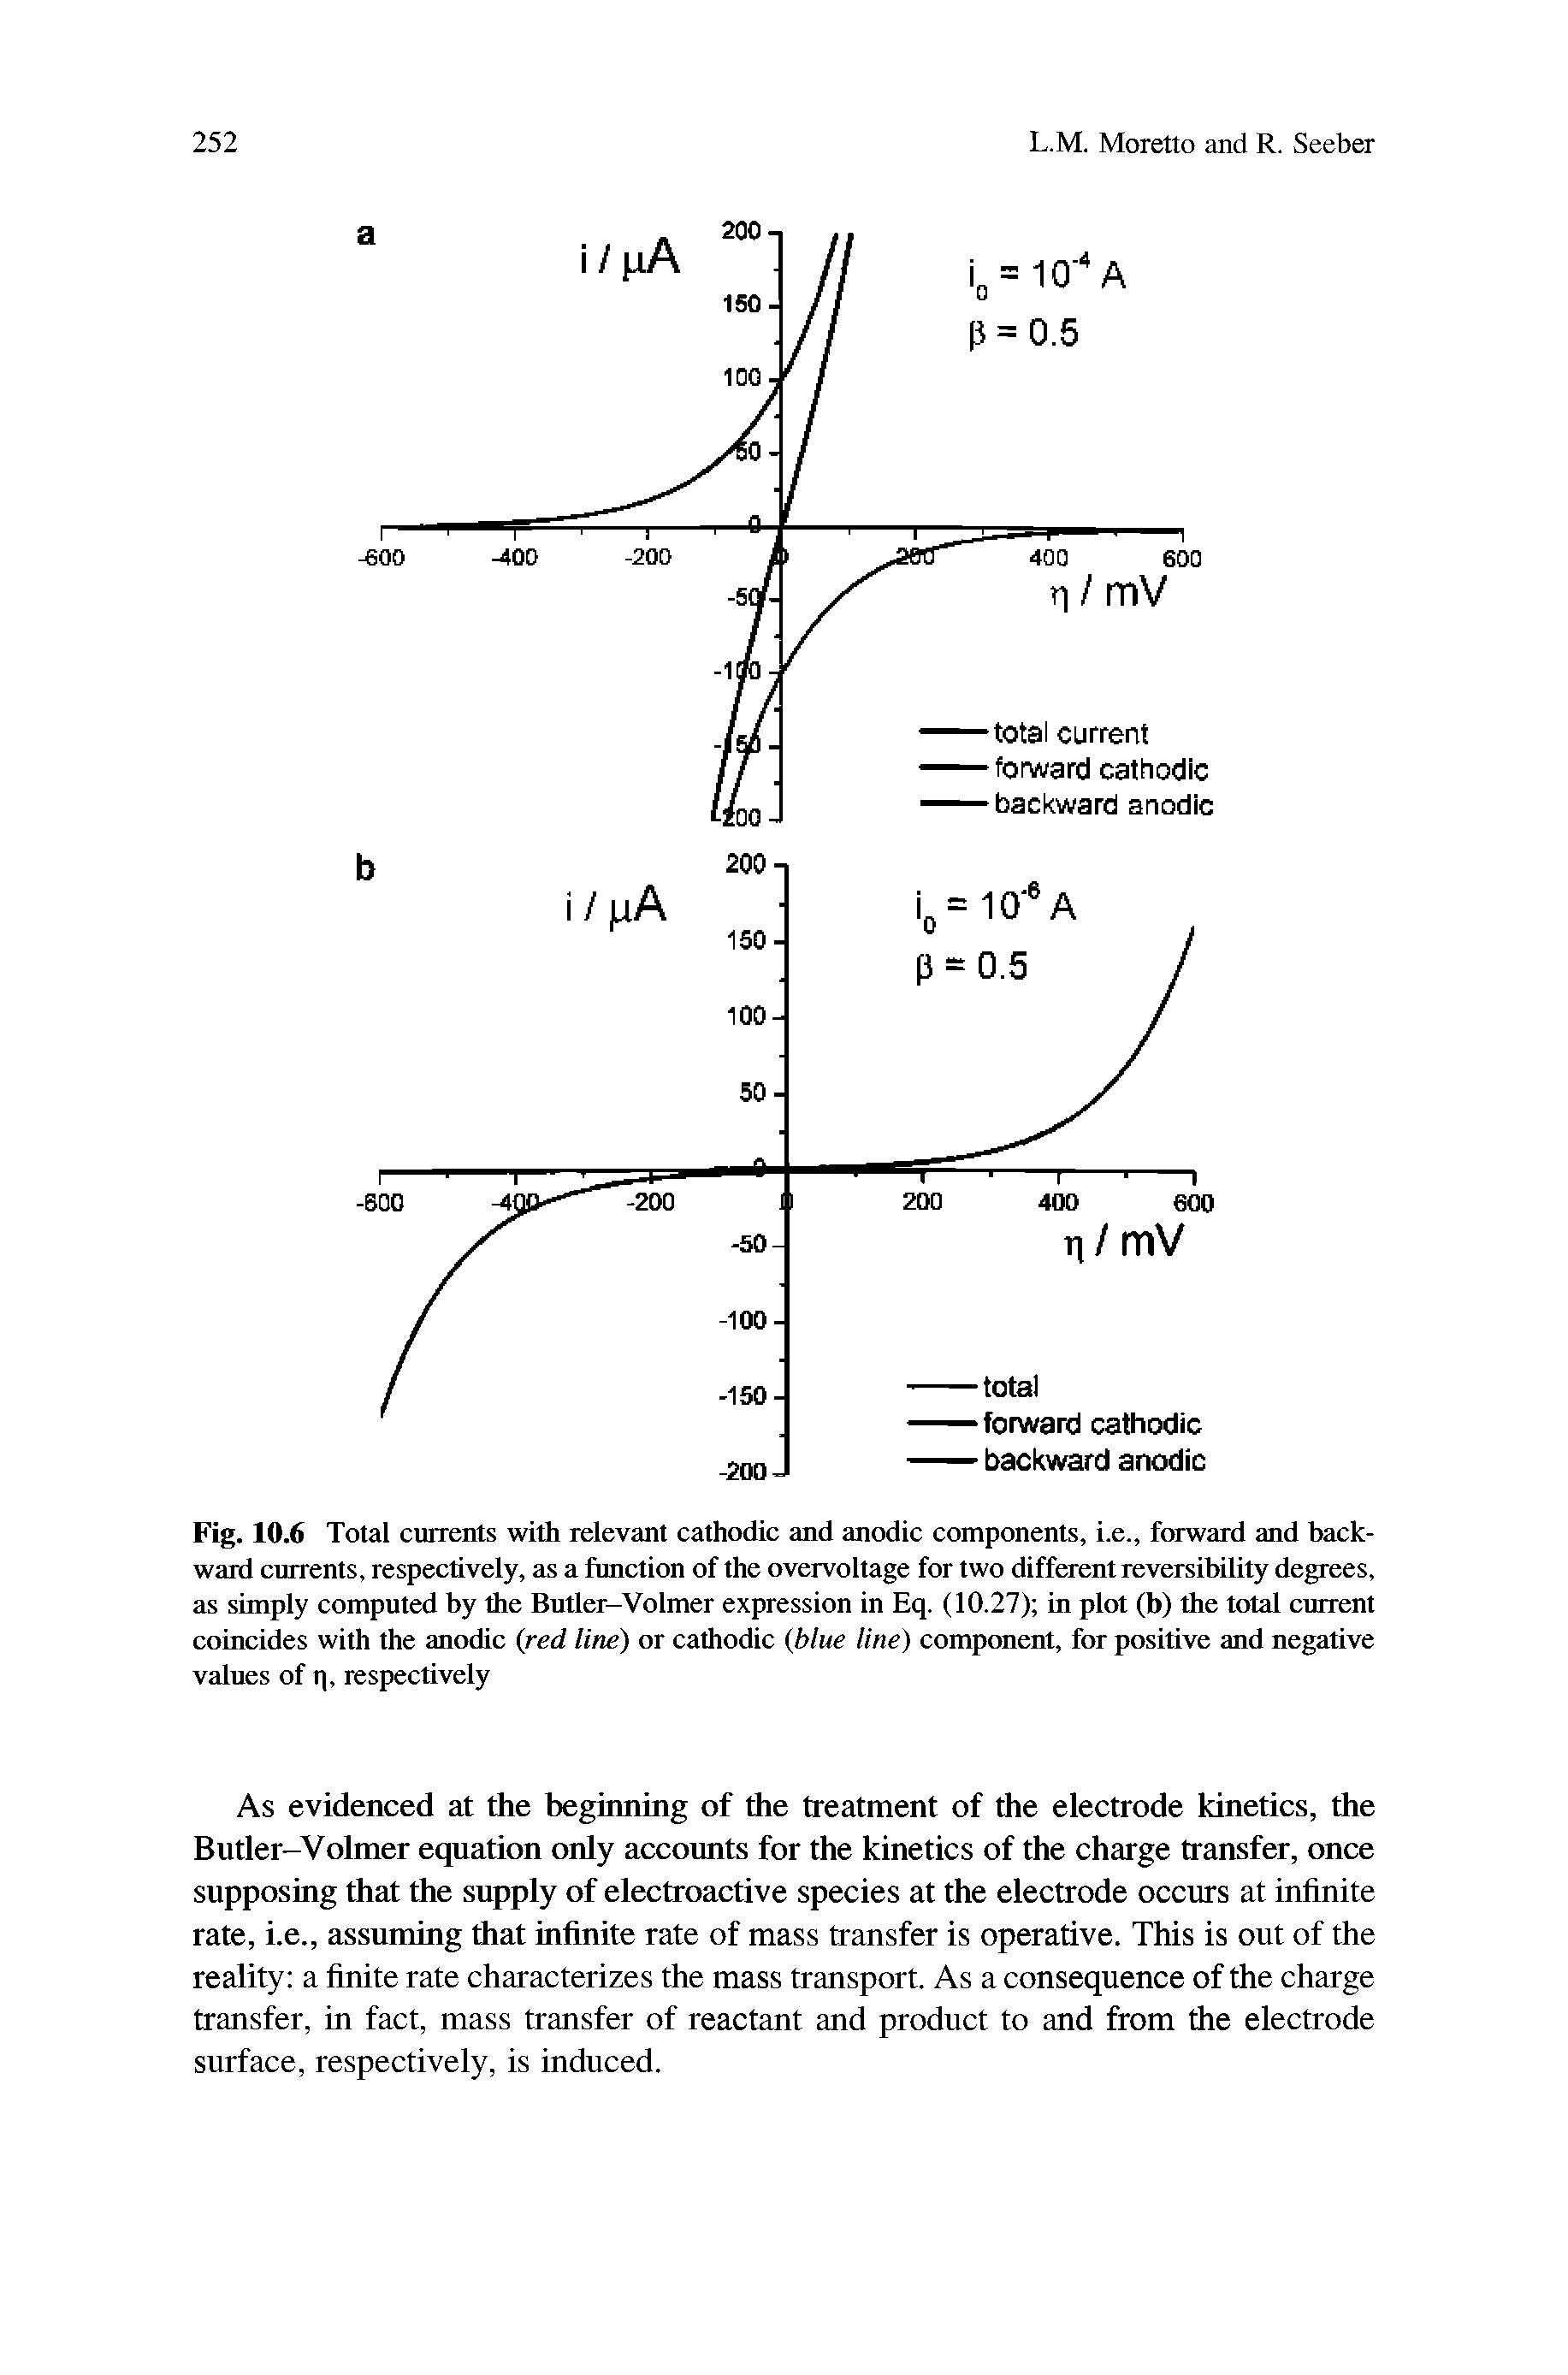 Fig. 10.6 Total currents with relevant cathodic and anodic components, i.e., forward and backward currents, respectively, as a function of the overvoltage for two different reversibility degrees, as simply computed by the Butler-Volmer expression in Eq. (10.27) in plot (b) the total current coincides with the anodic (red line) or cathodic (blue line) component, for positive and negative values of q, respectively...